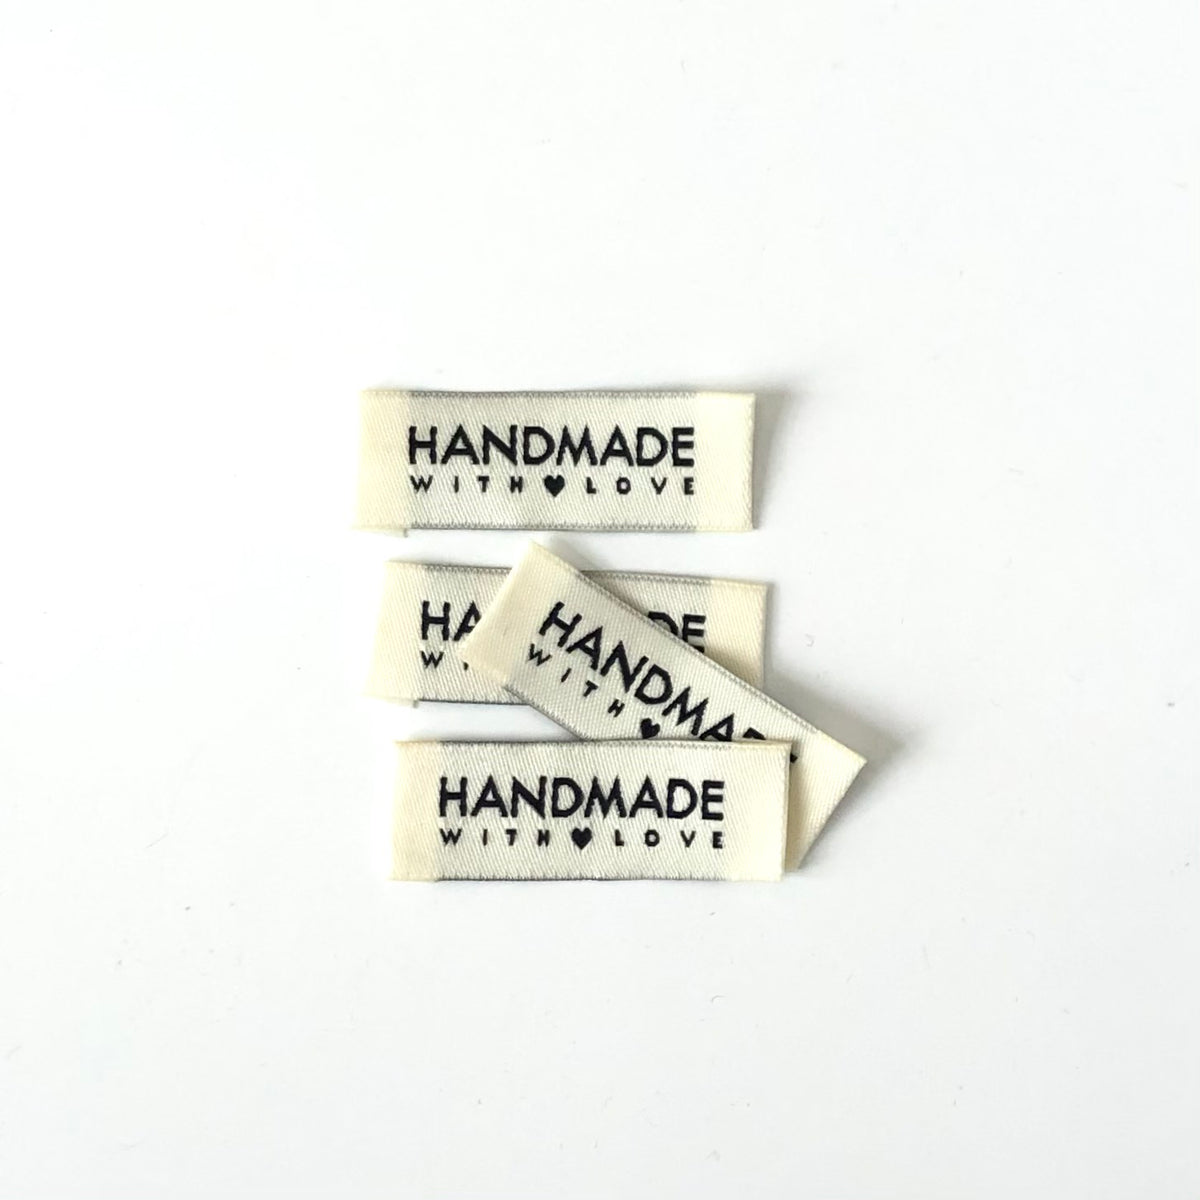 Handmade With Love - Sewaholic Woven Clothing Label - Pack of 4 Sew-In  Labels